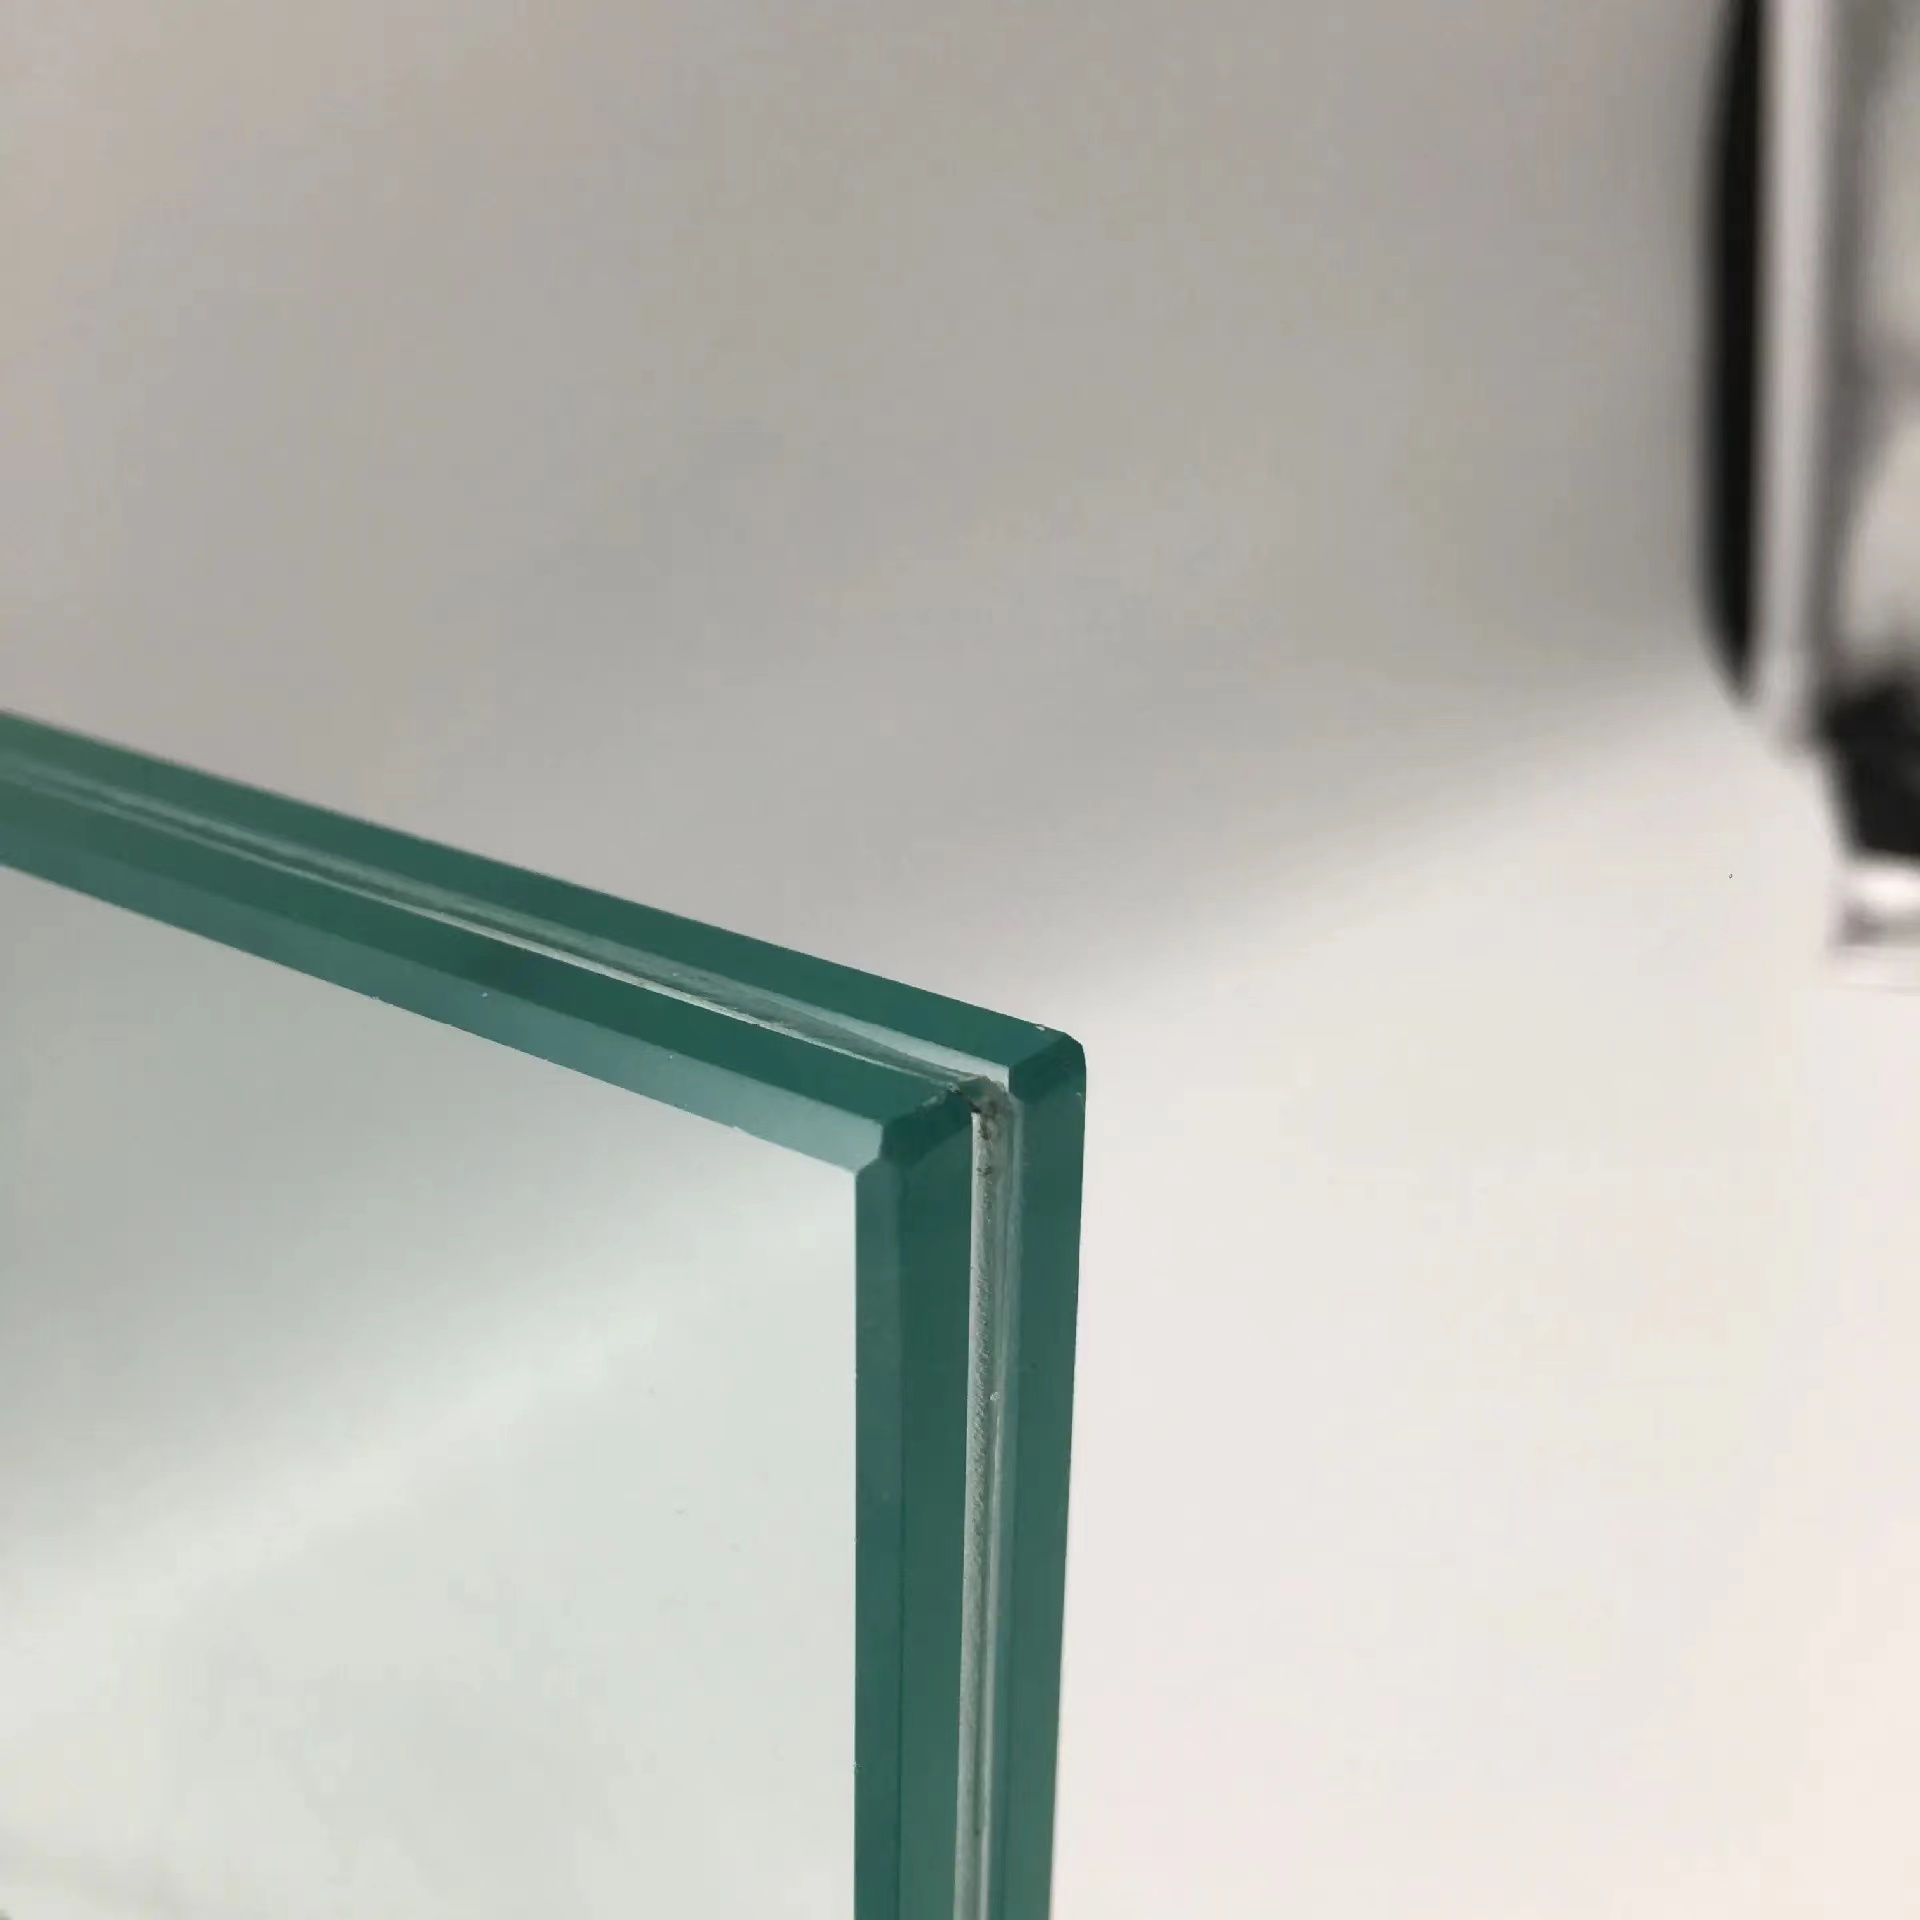 Float Glass Panels Market research report covers future, past and current trends | PPG, Interpane Glas Industrie AG, SCHOTT AG, Vitro Cristalglass – Argyle Report